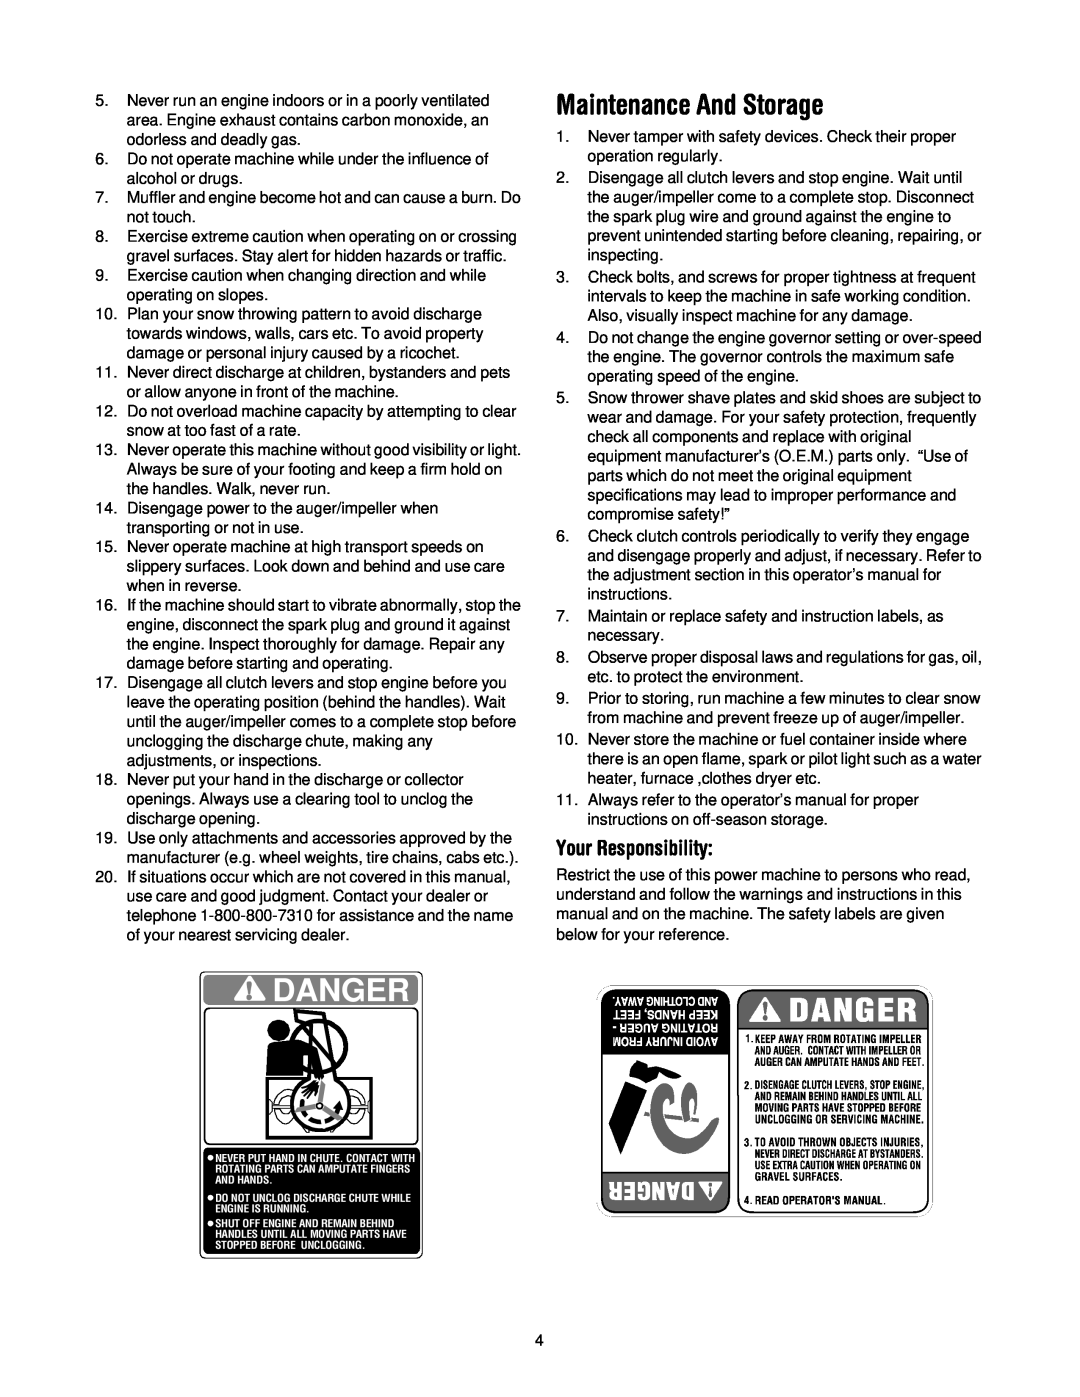 Cub Cadet 522 WE manual Maintenance And Storage, Danger, Your Responsibility 